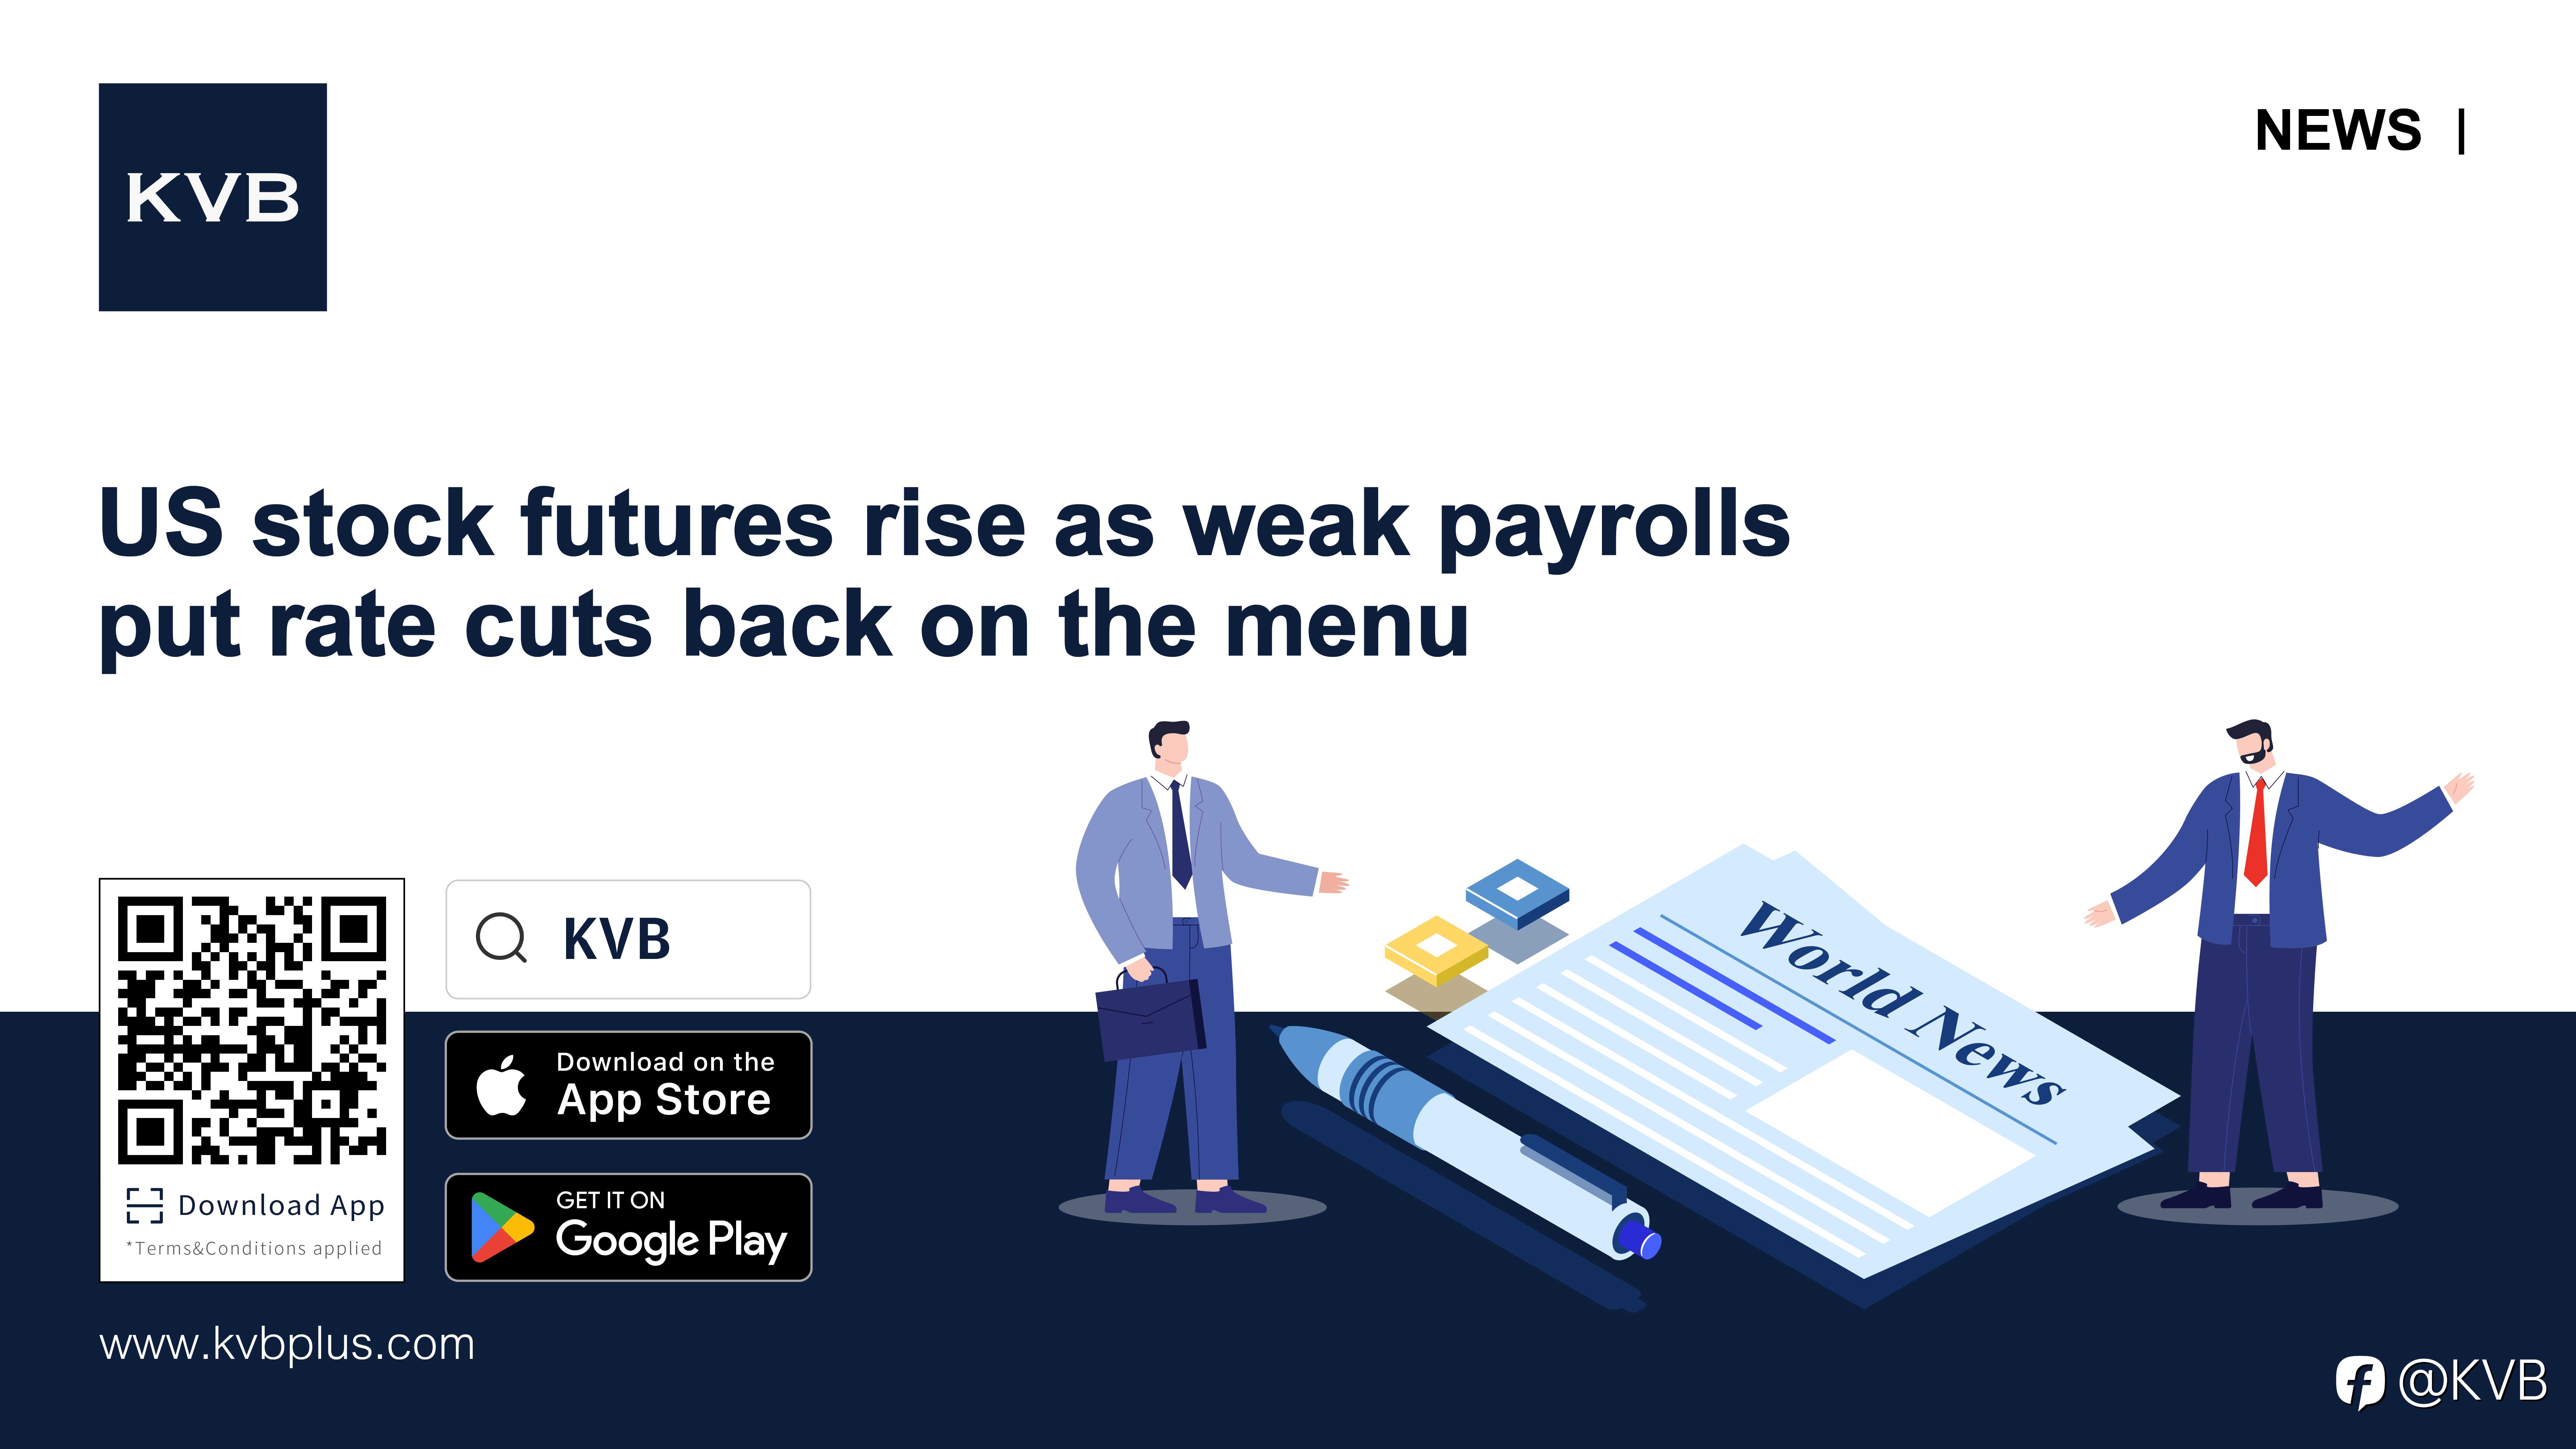 🚨 US stock futures rise as weak payrolls put rate cuts back on the menu 🧑🏻‍💻📉